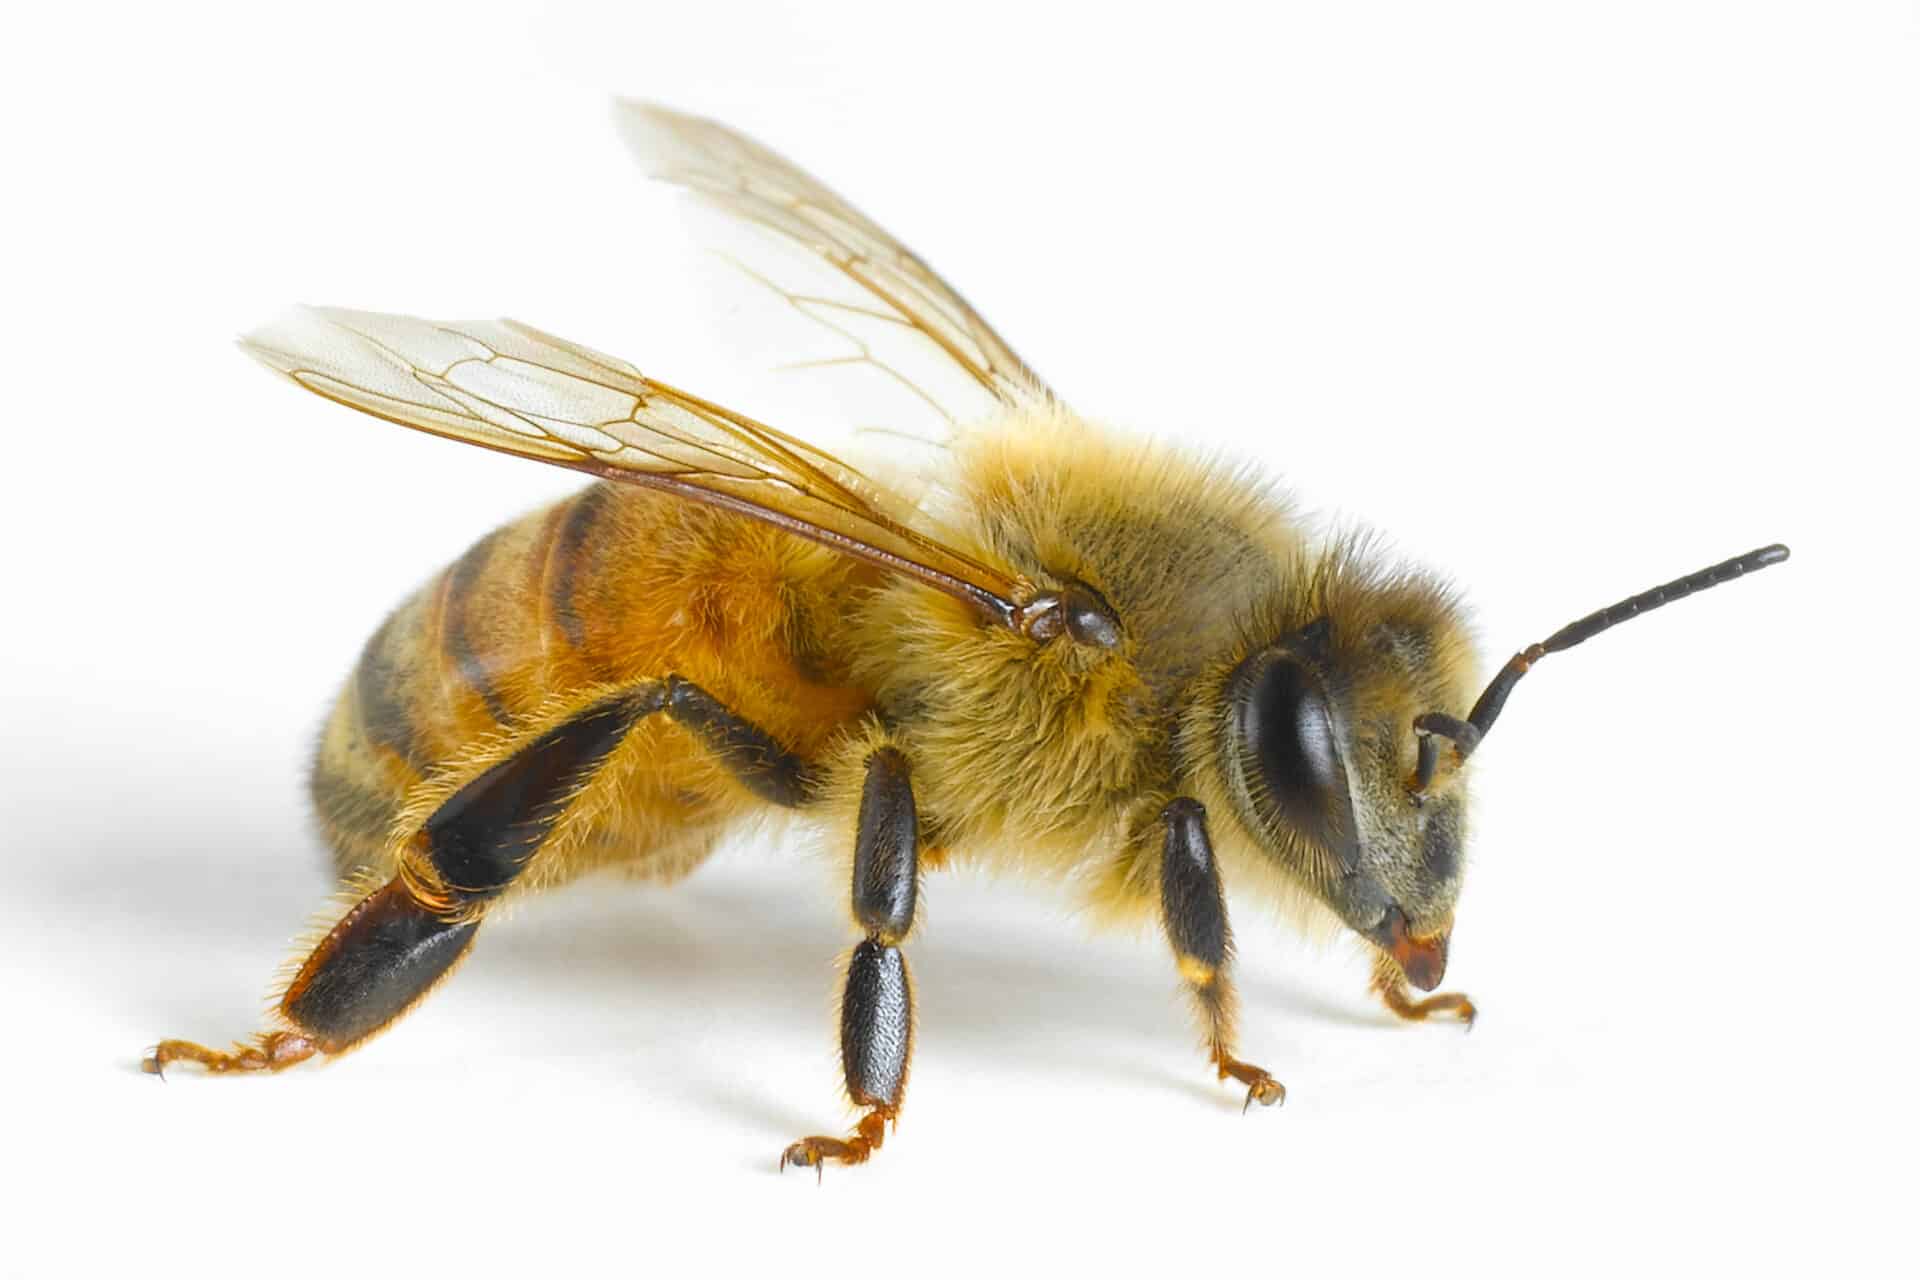 Are Bees Attracted to Breast milk?